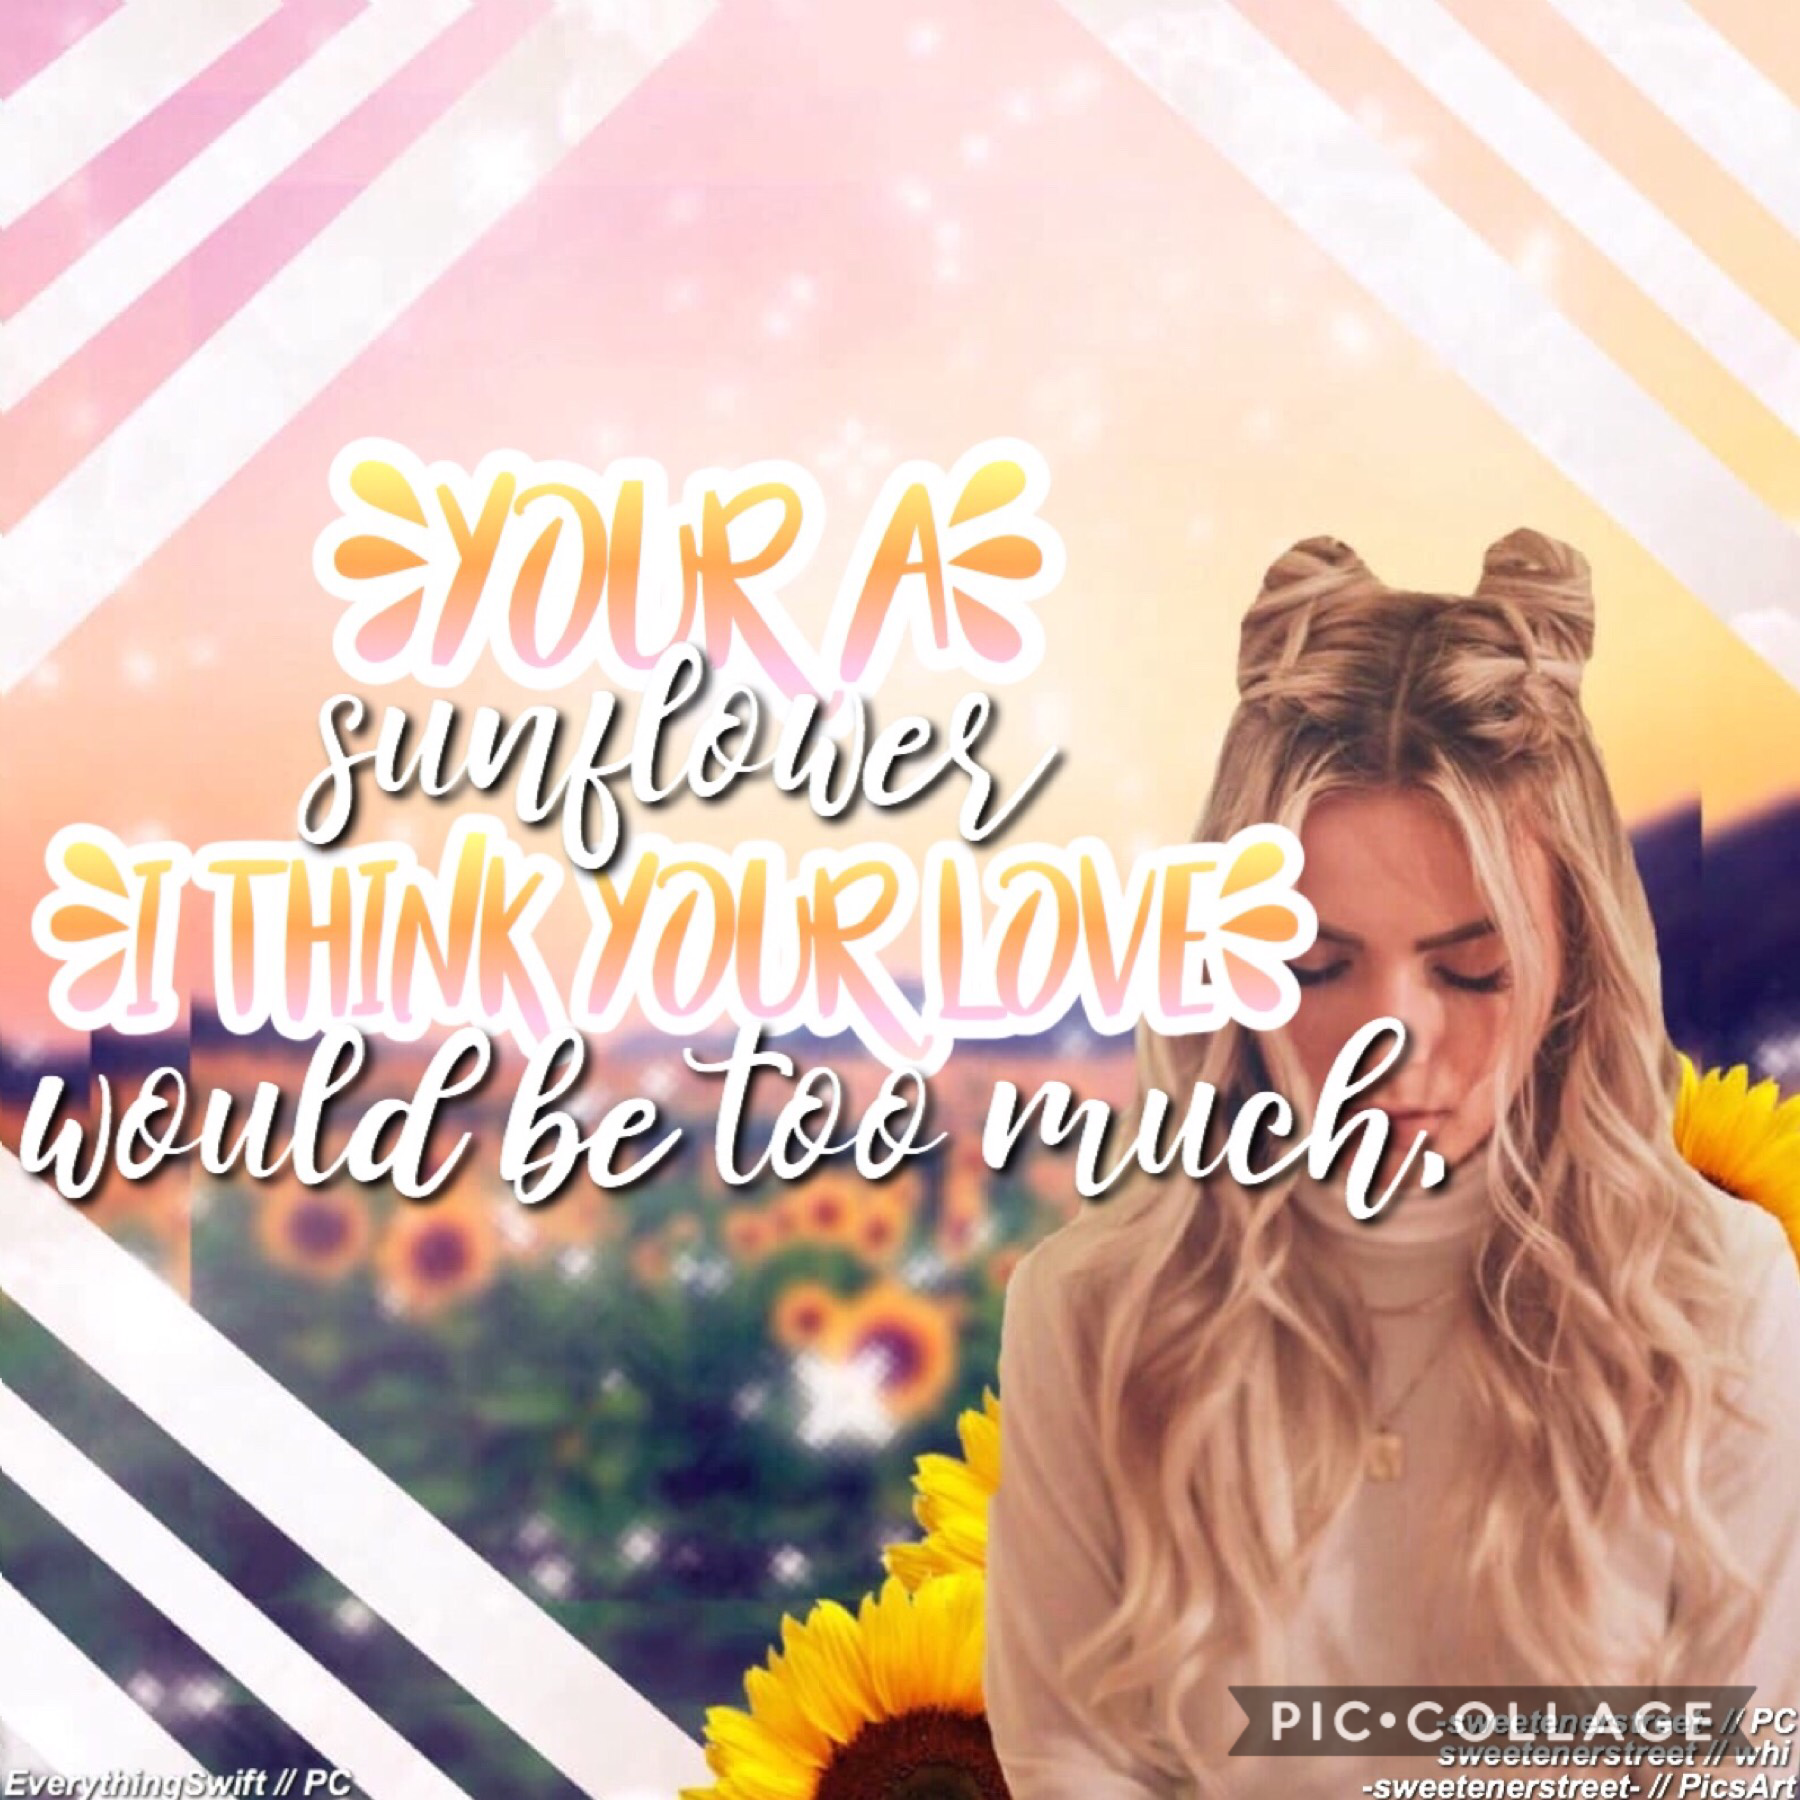 Collab with the awesomely, talented...🥁🥁🥁
EverythingSwift ! 💛💛💛🤩🤩🤩
I absolutely love this song! ☀️☀️🌻🌻